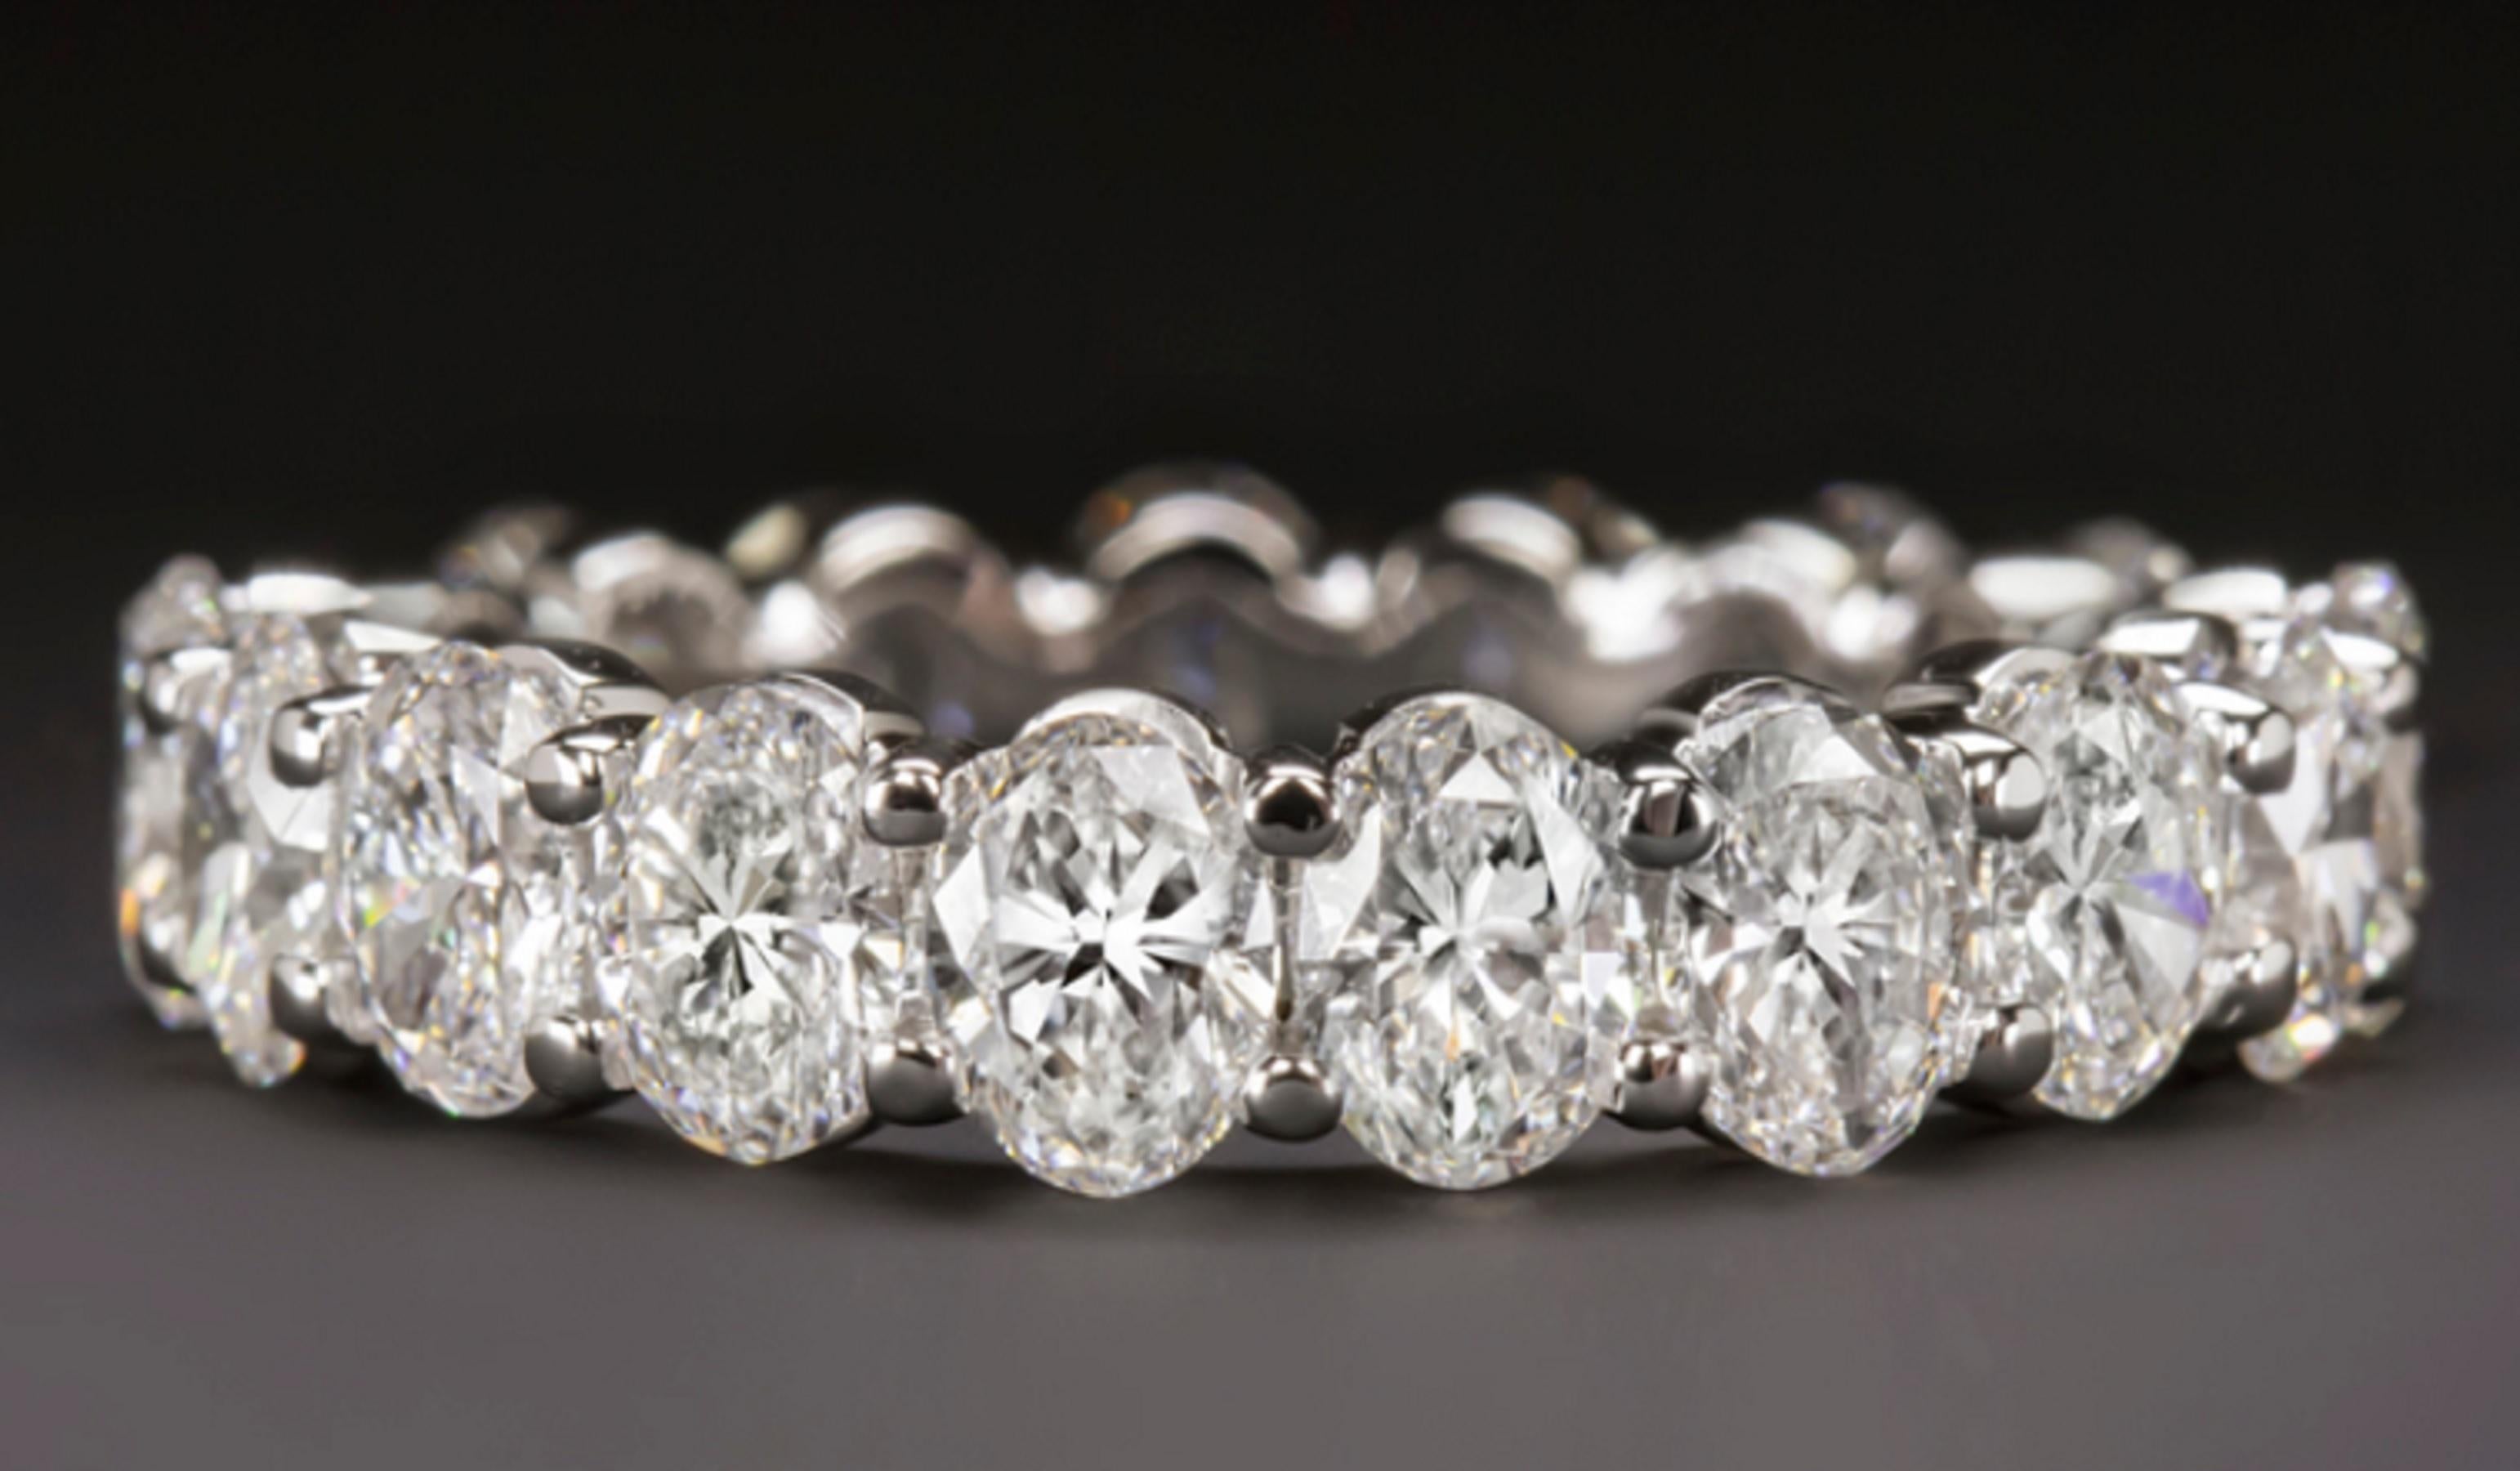 Eternity ring features approximately 3.60 carat of vibrant oval cut diamonds set in an elegantly simple modern band. High quality, perfectly matched, and substantially sized diamonds cover the full diameter of the ring in dazzling sparkle. Bright